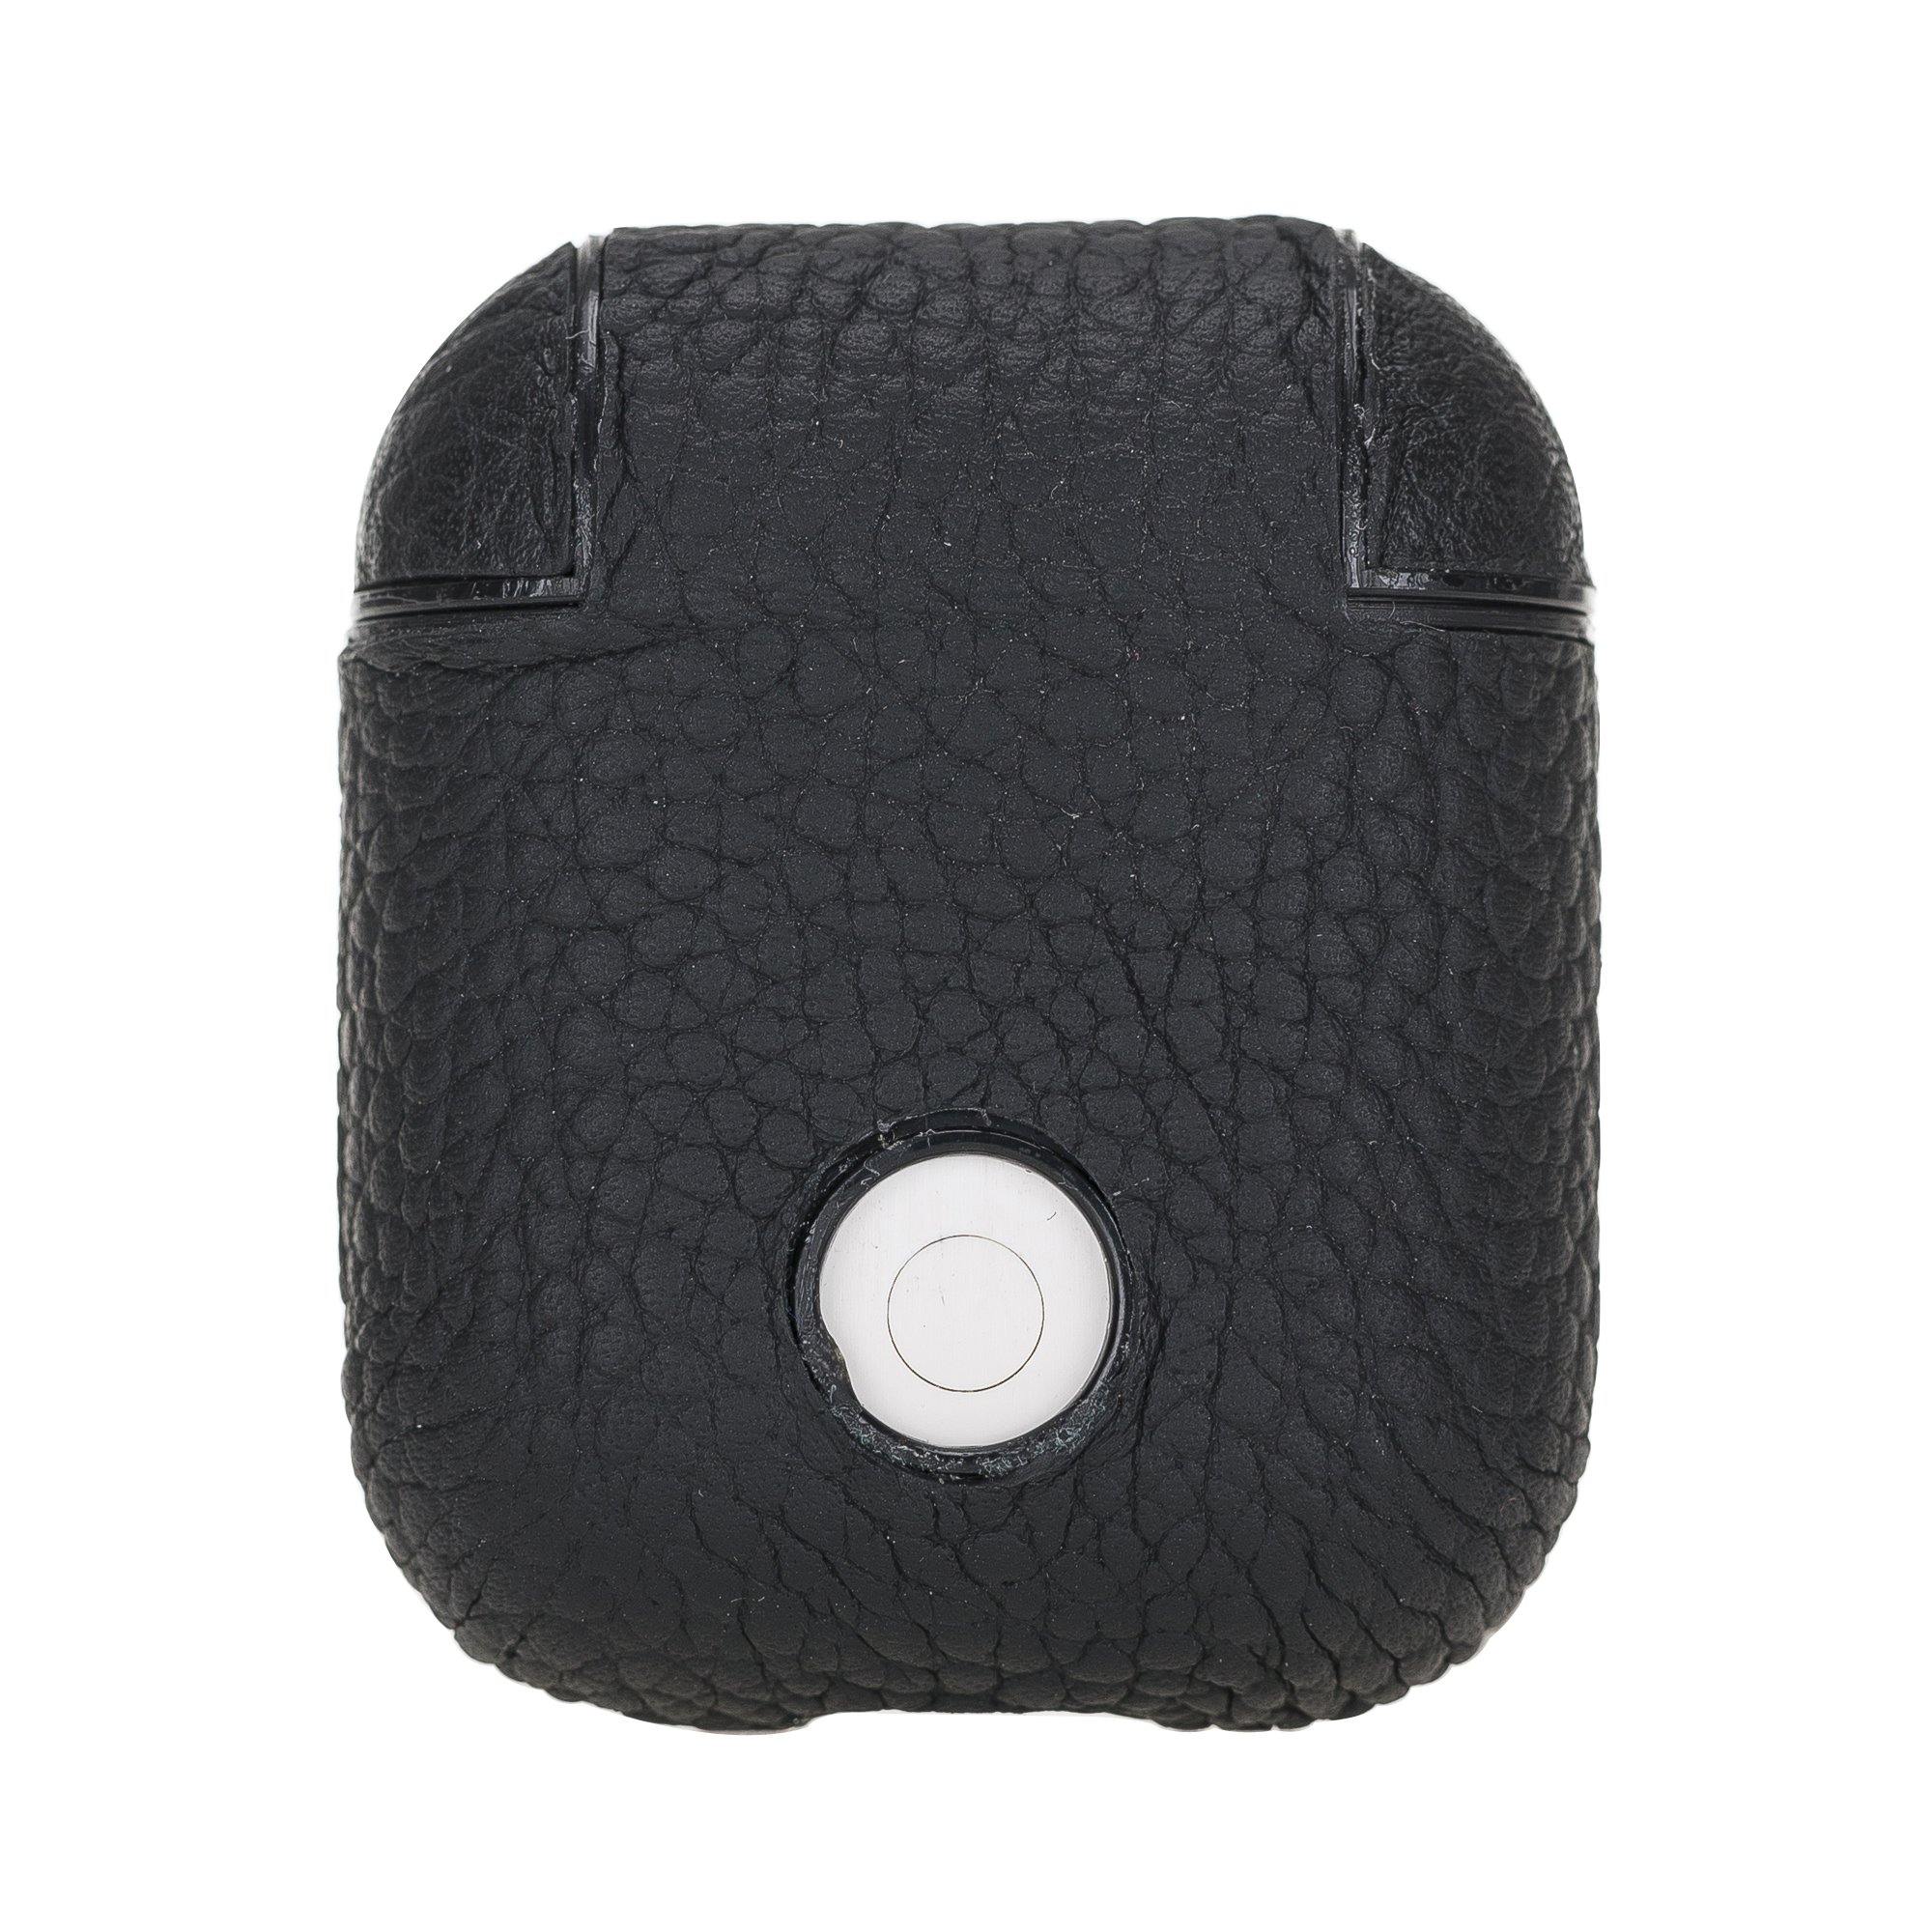 Apple AirPods case | genuine leather | personalised with your initials - PersonalisebyLisa